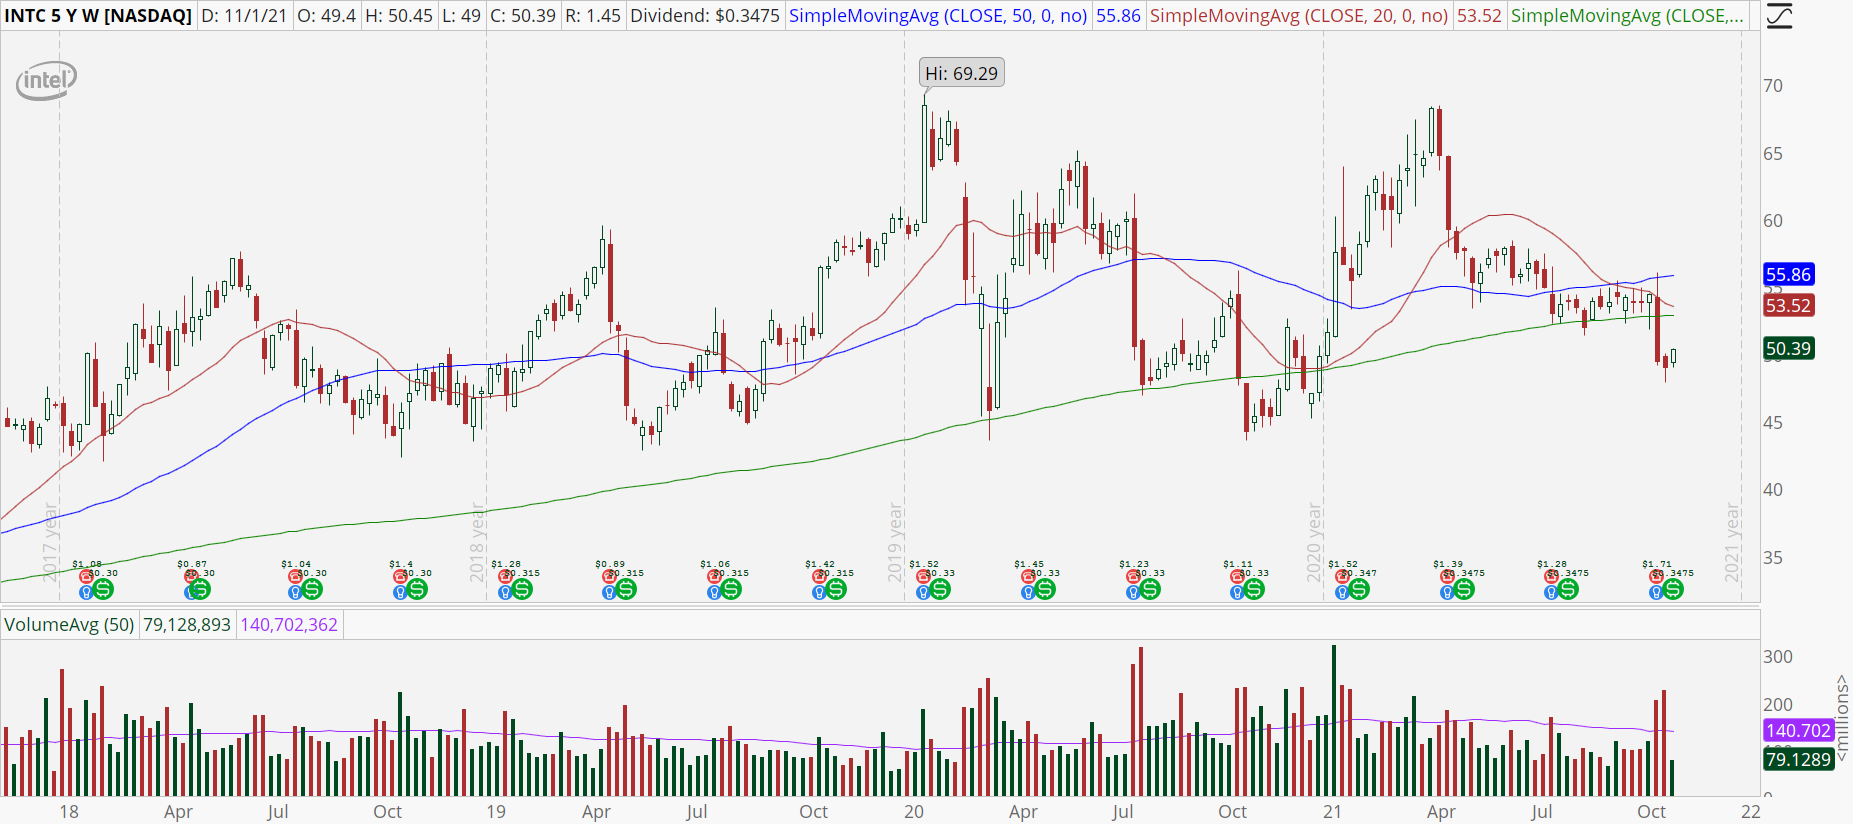 Intel (INTC) stock weekly chart with messy trading range